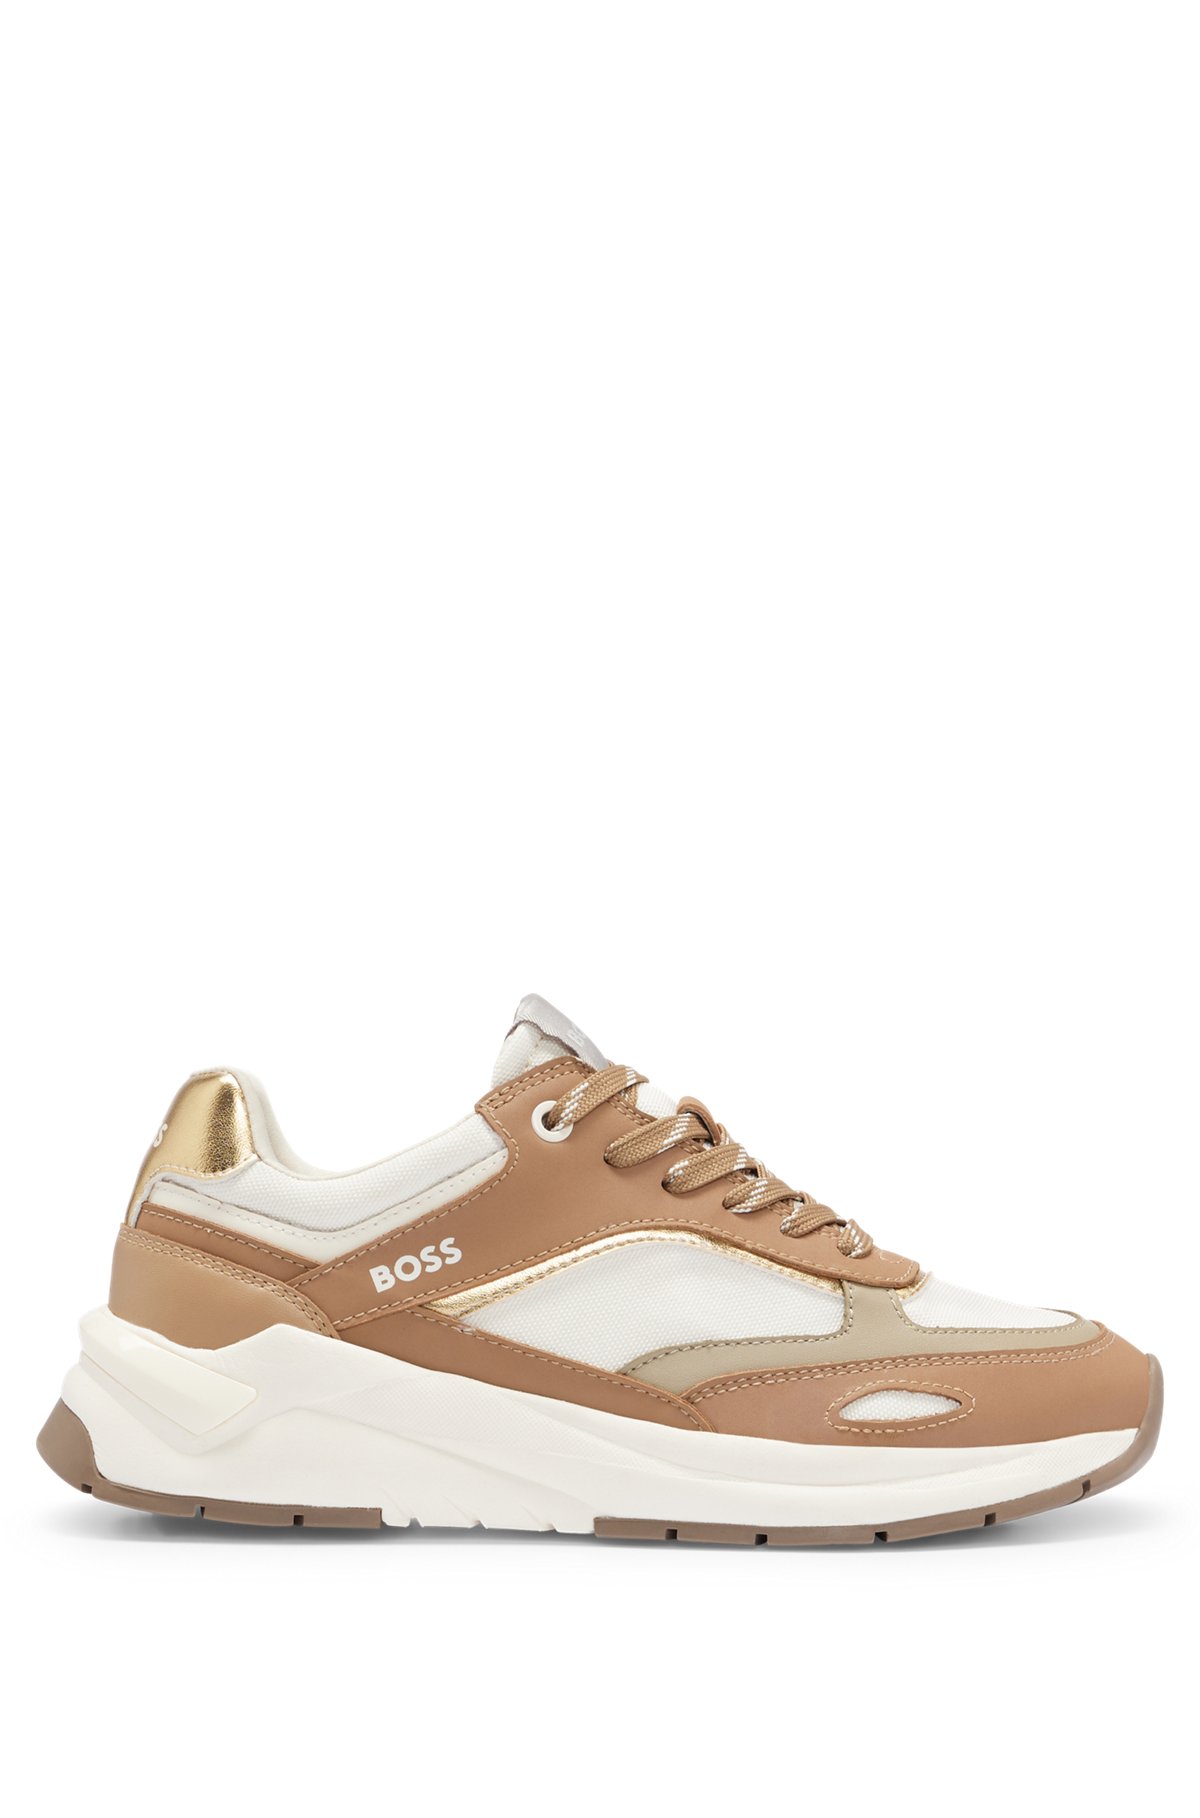 Mixed-material trainers with metallic details, Beige